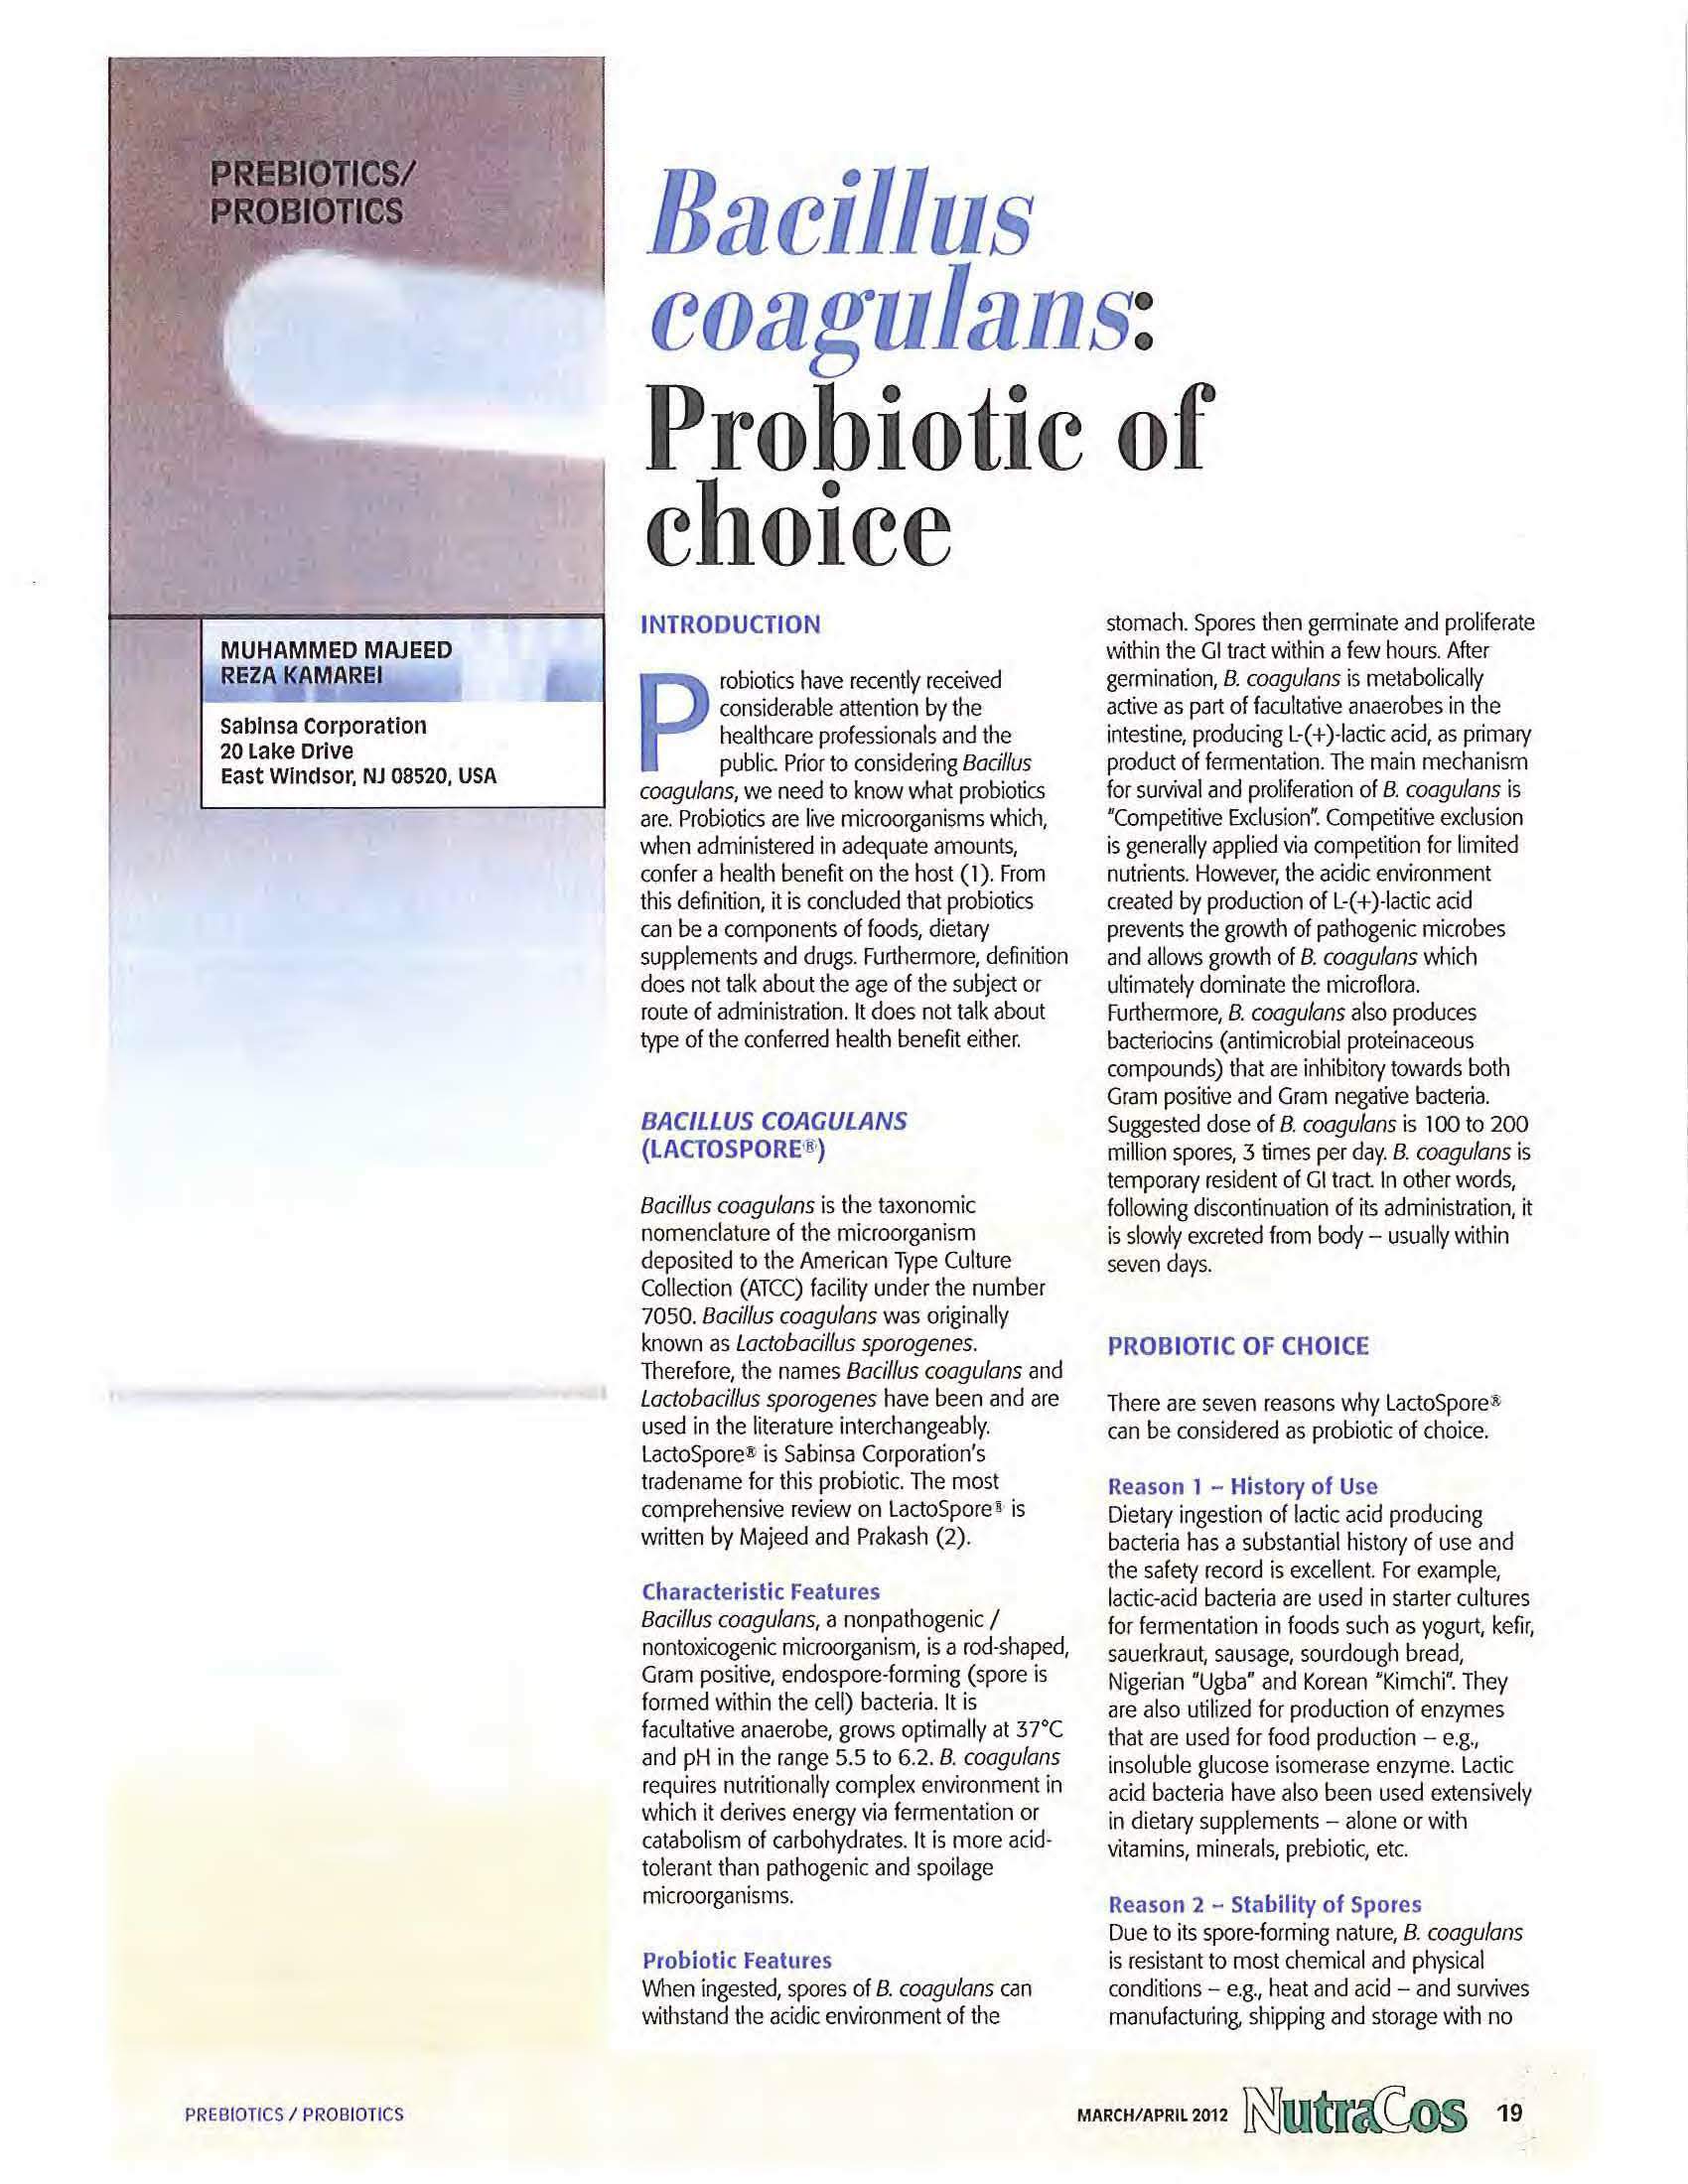 bacillus-coagulans-probiotic-of-choice-nutracos-march-april-2012